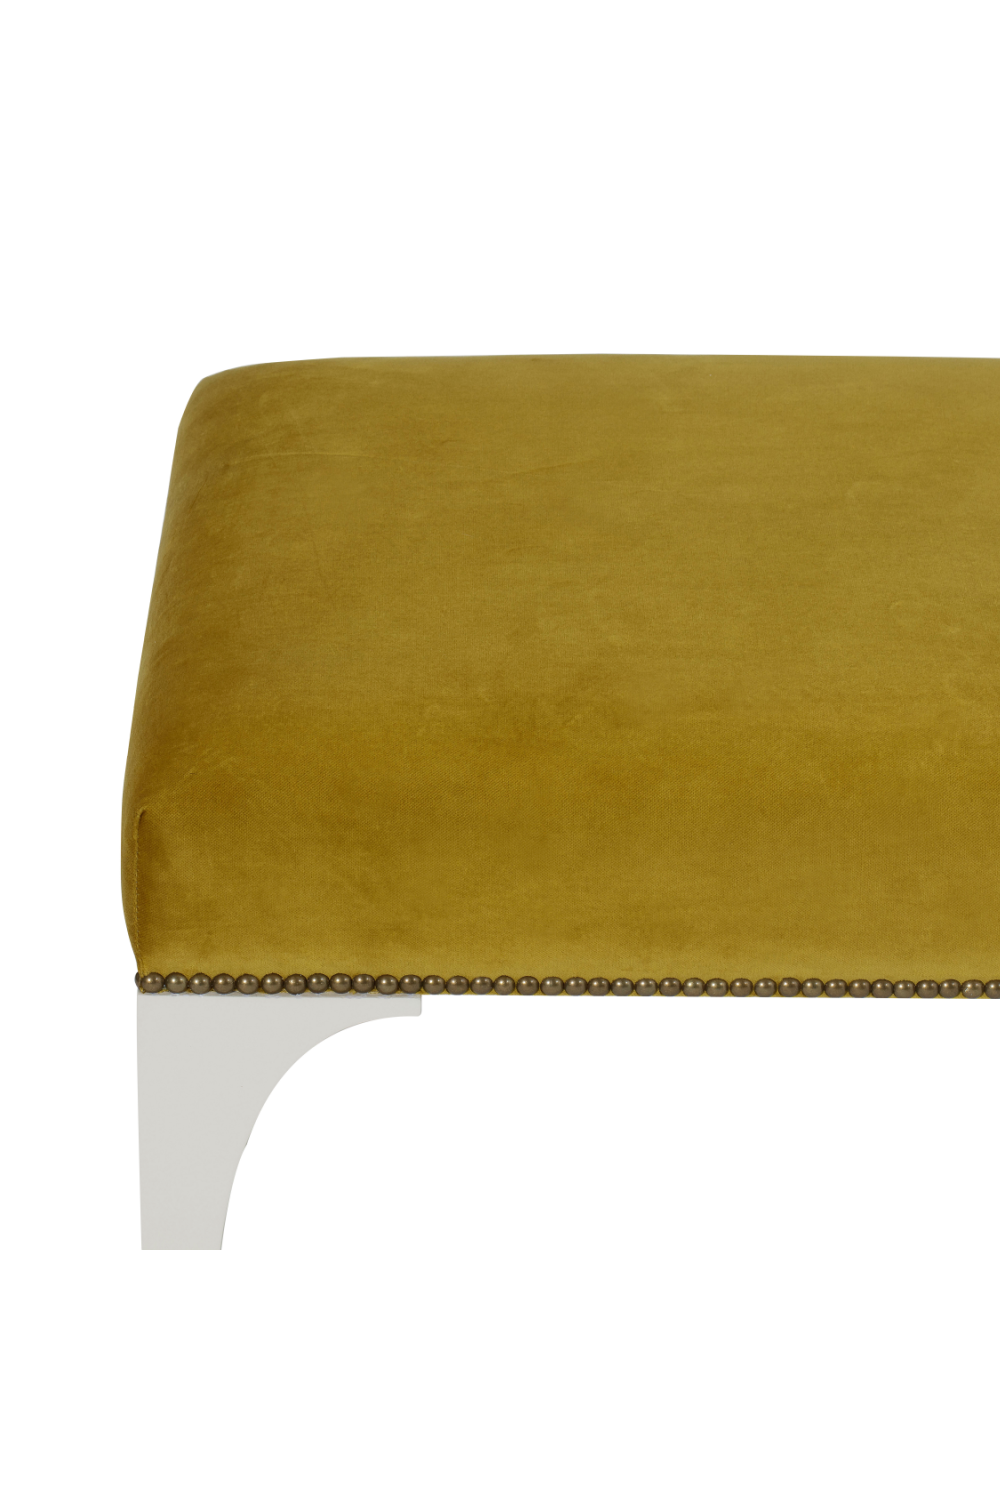 Yellow Leather Studded Bench | Andrew Martin James | OROA